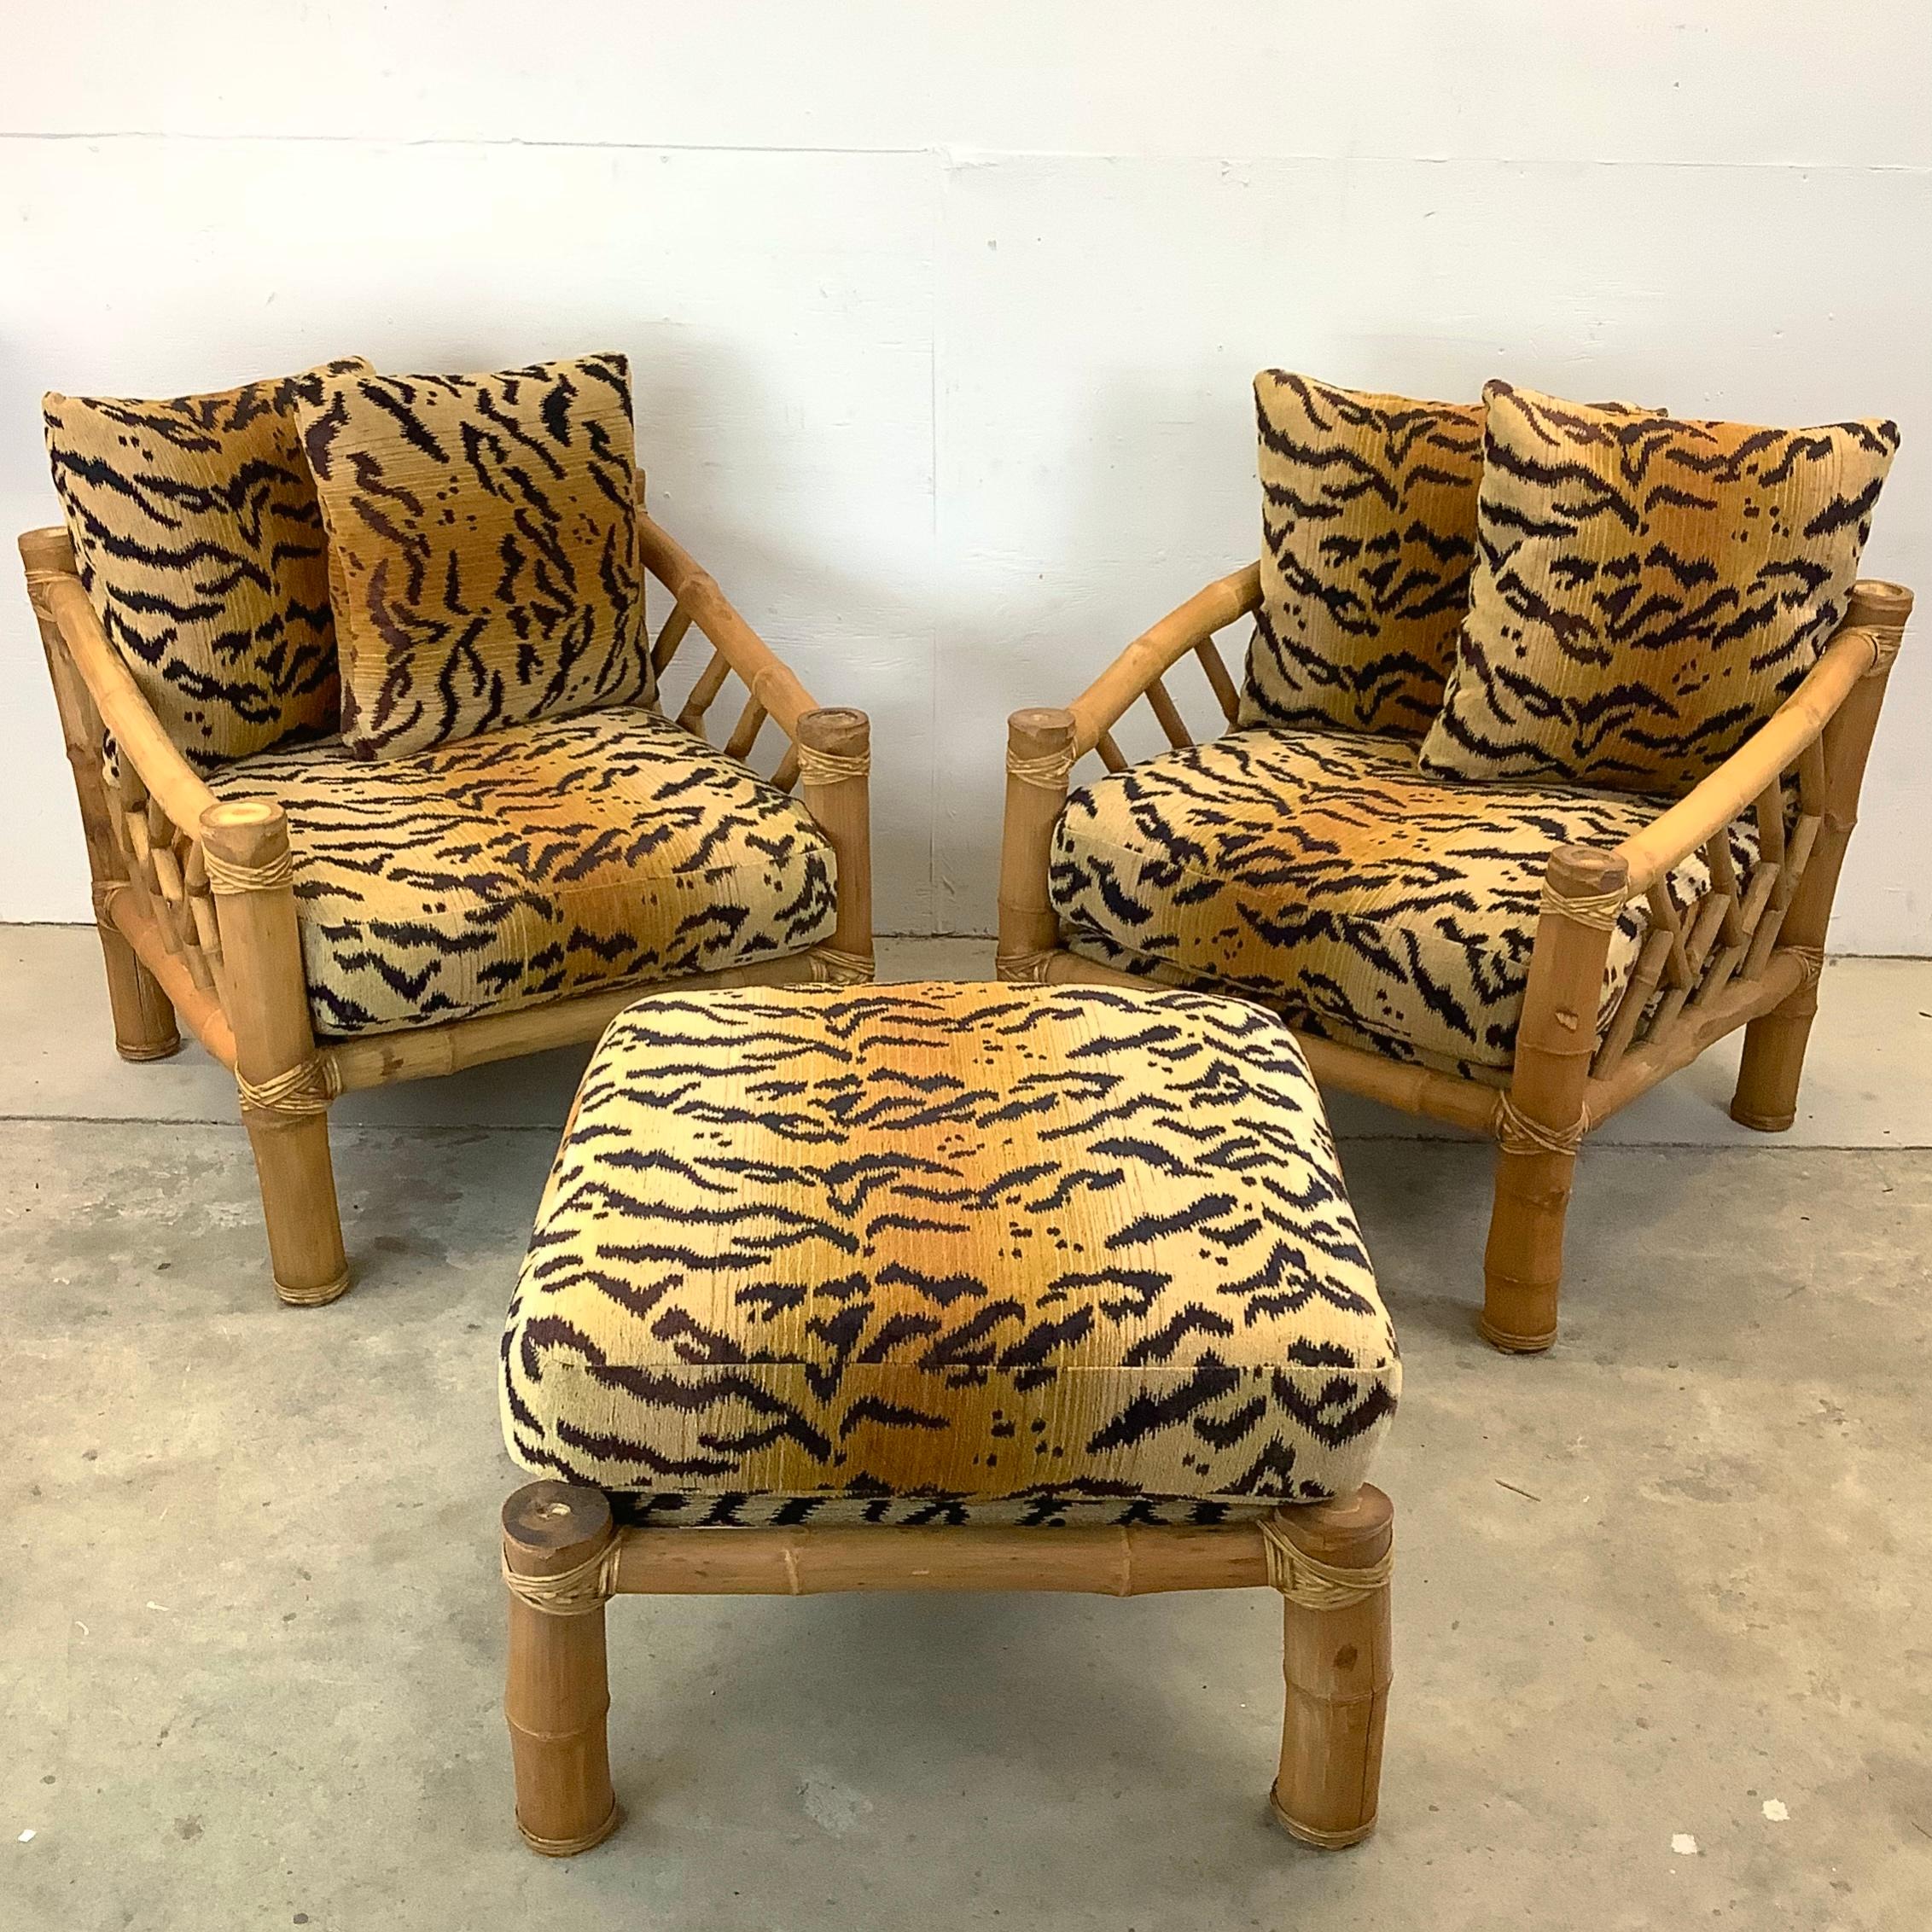 Step into the world of elegant sustainability with this pair of vintage bamboo lounge chairs and their companion ottoman, all adorned with an exuberant tiger-striped upholstery that adds volumes of boho charm to any setting. This set is a haven for